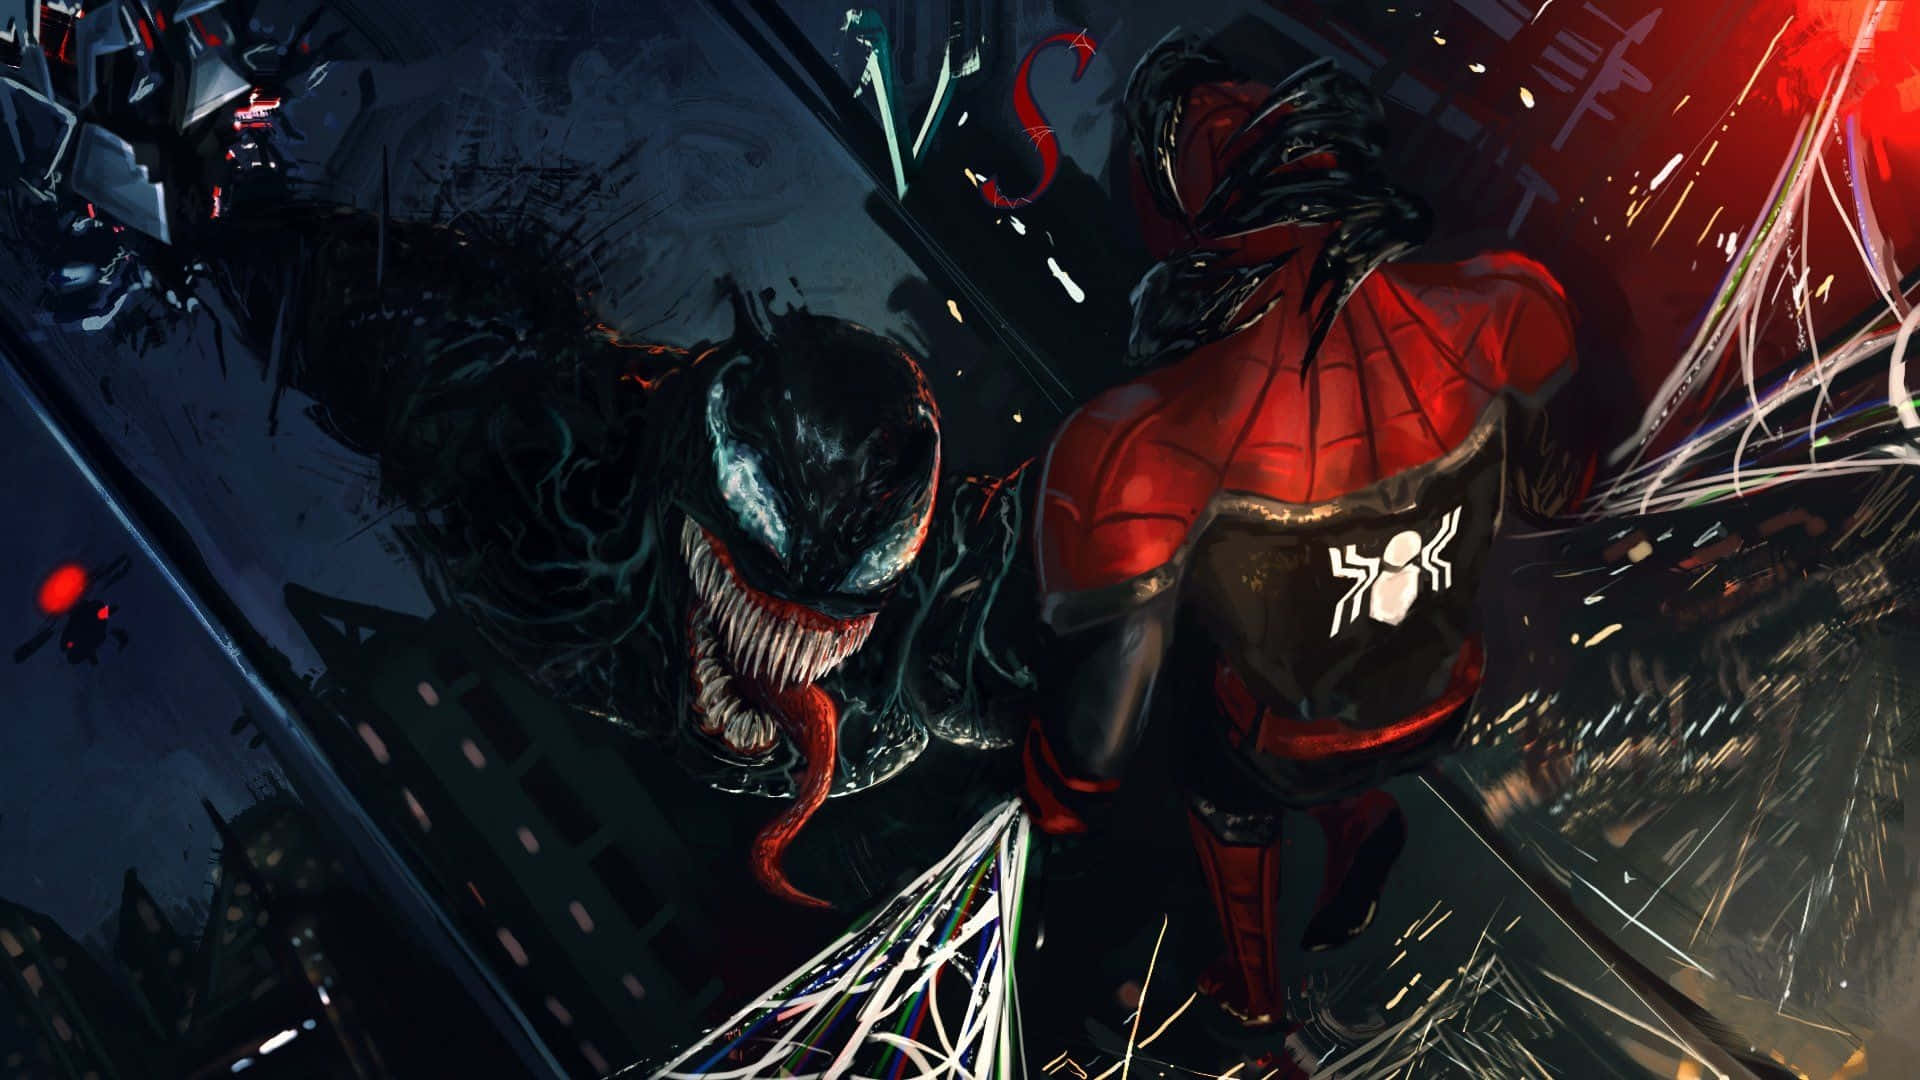 Venom And Spider Man In The City Wallpaper